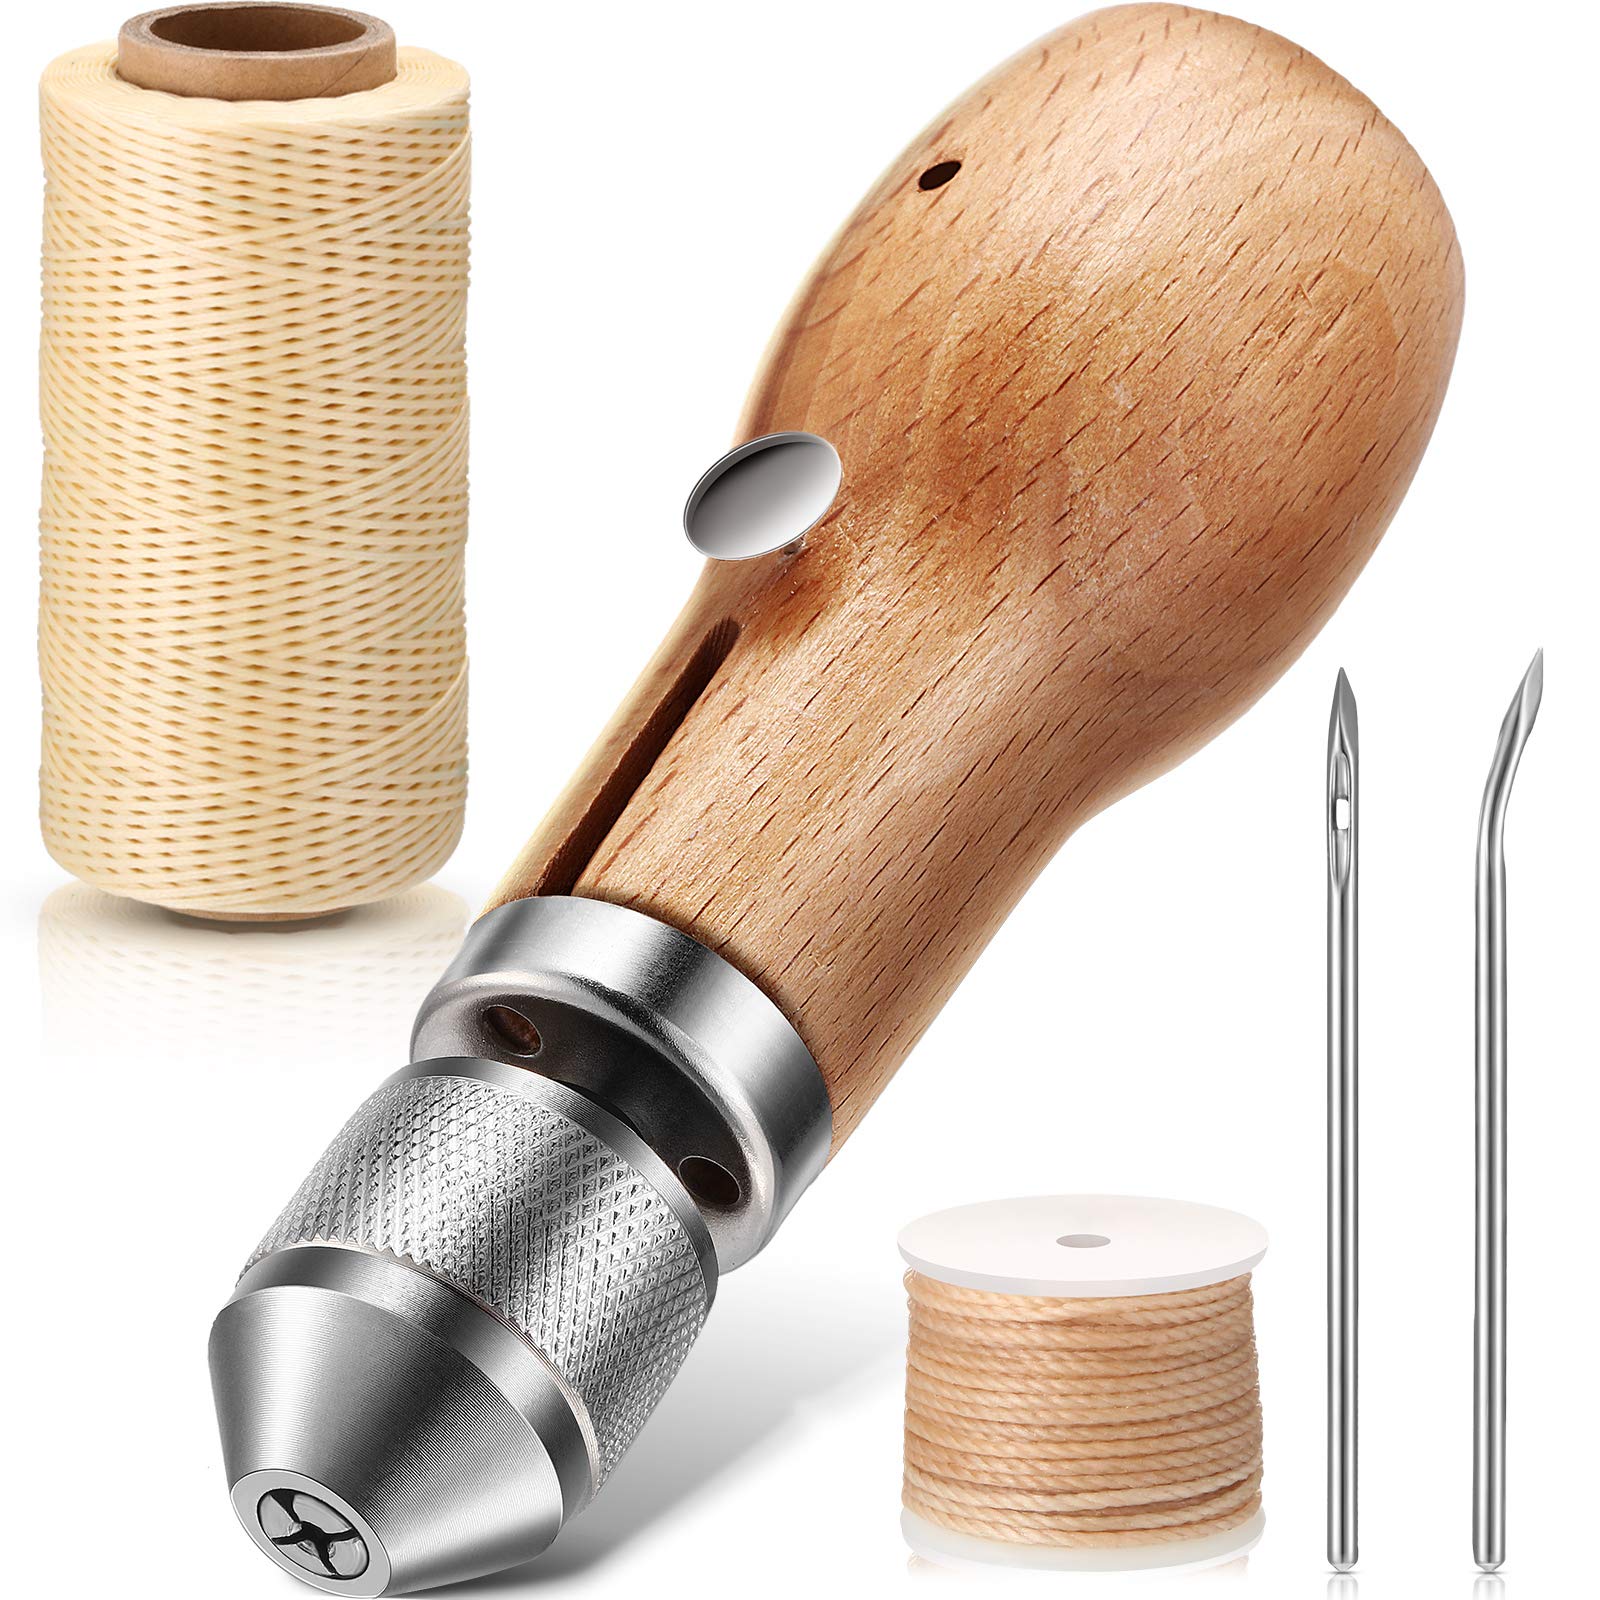 Awl Sewing Leather Tools Wood, Leather Tools Awl Stitching